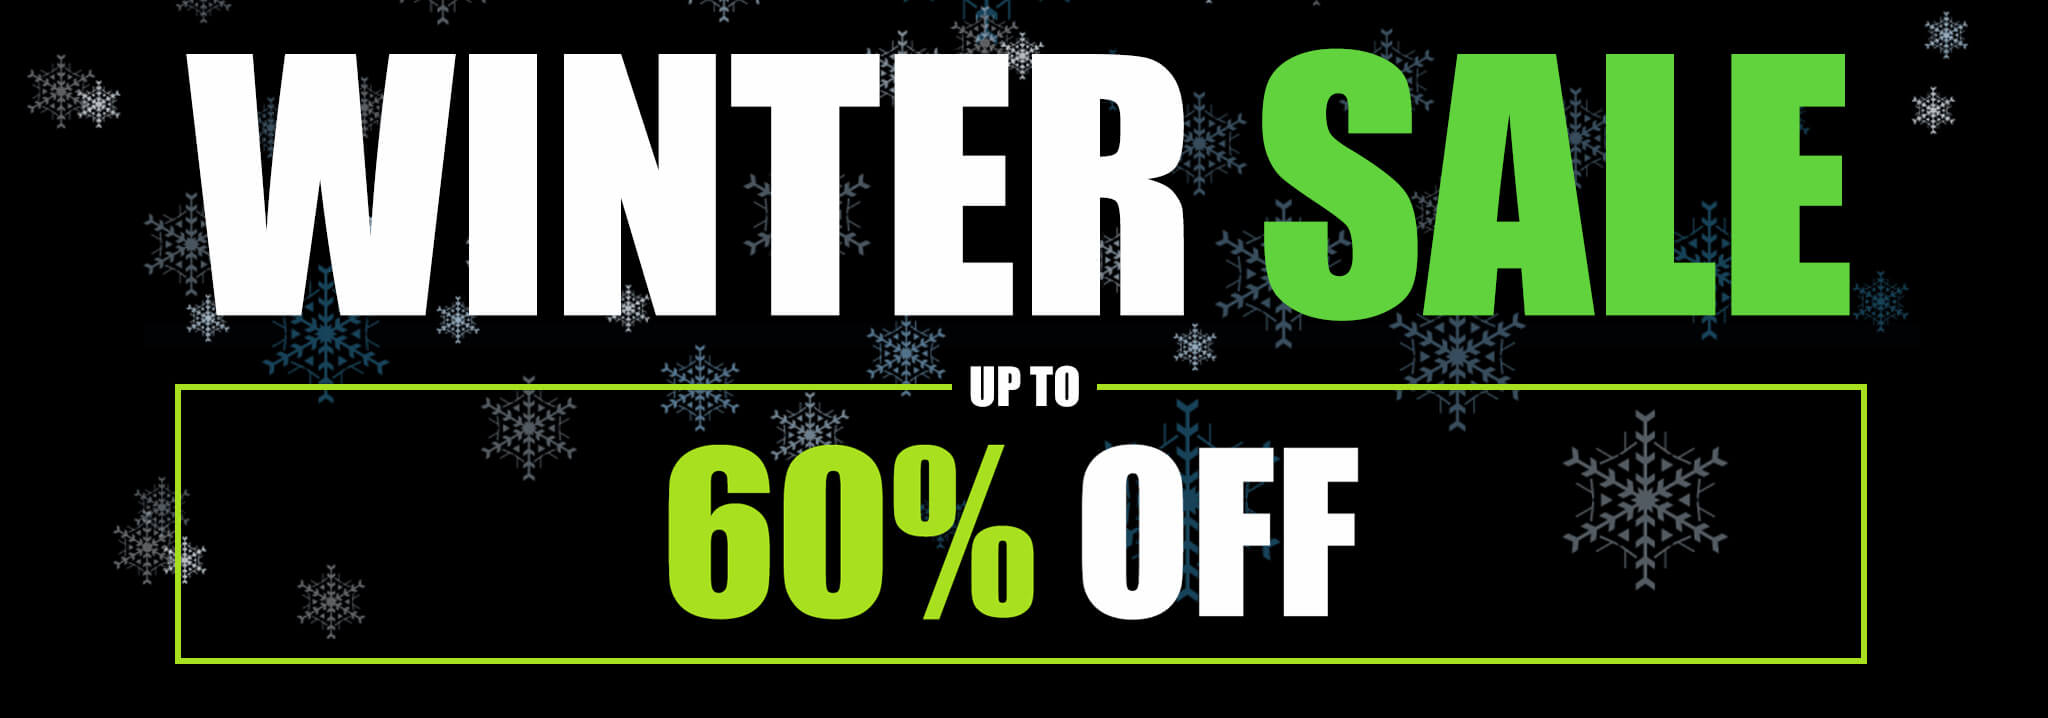 Tile Centre Winter Sale up to 60% OFF